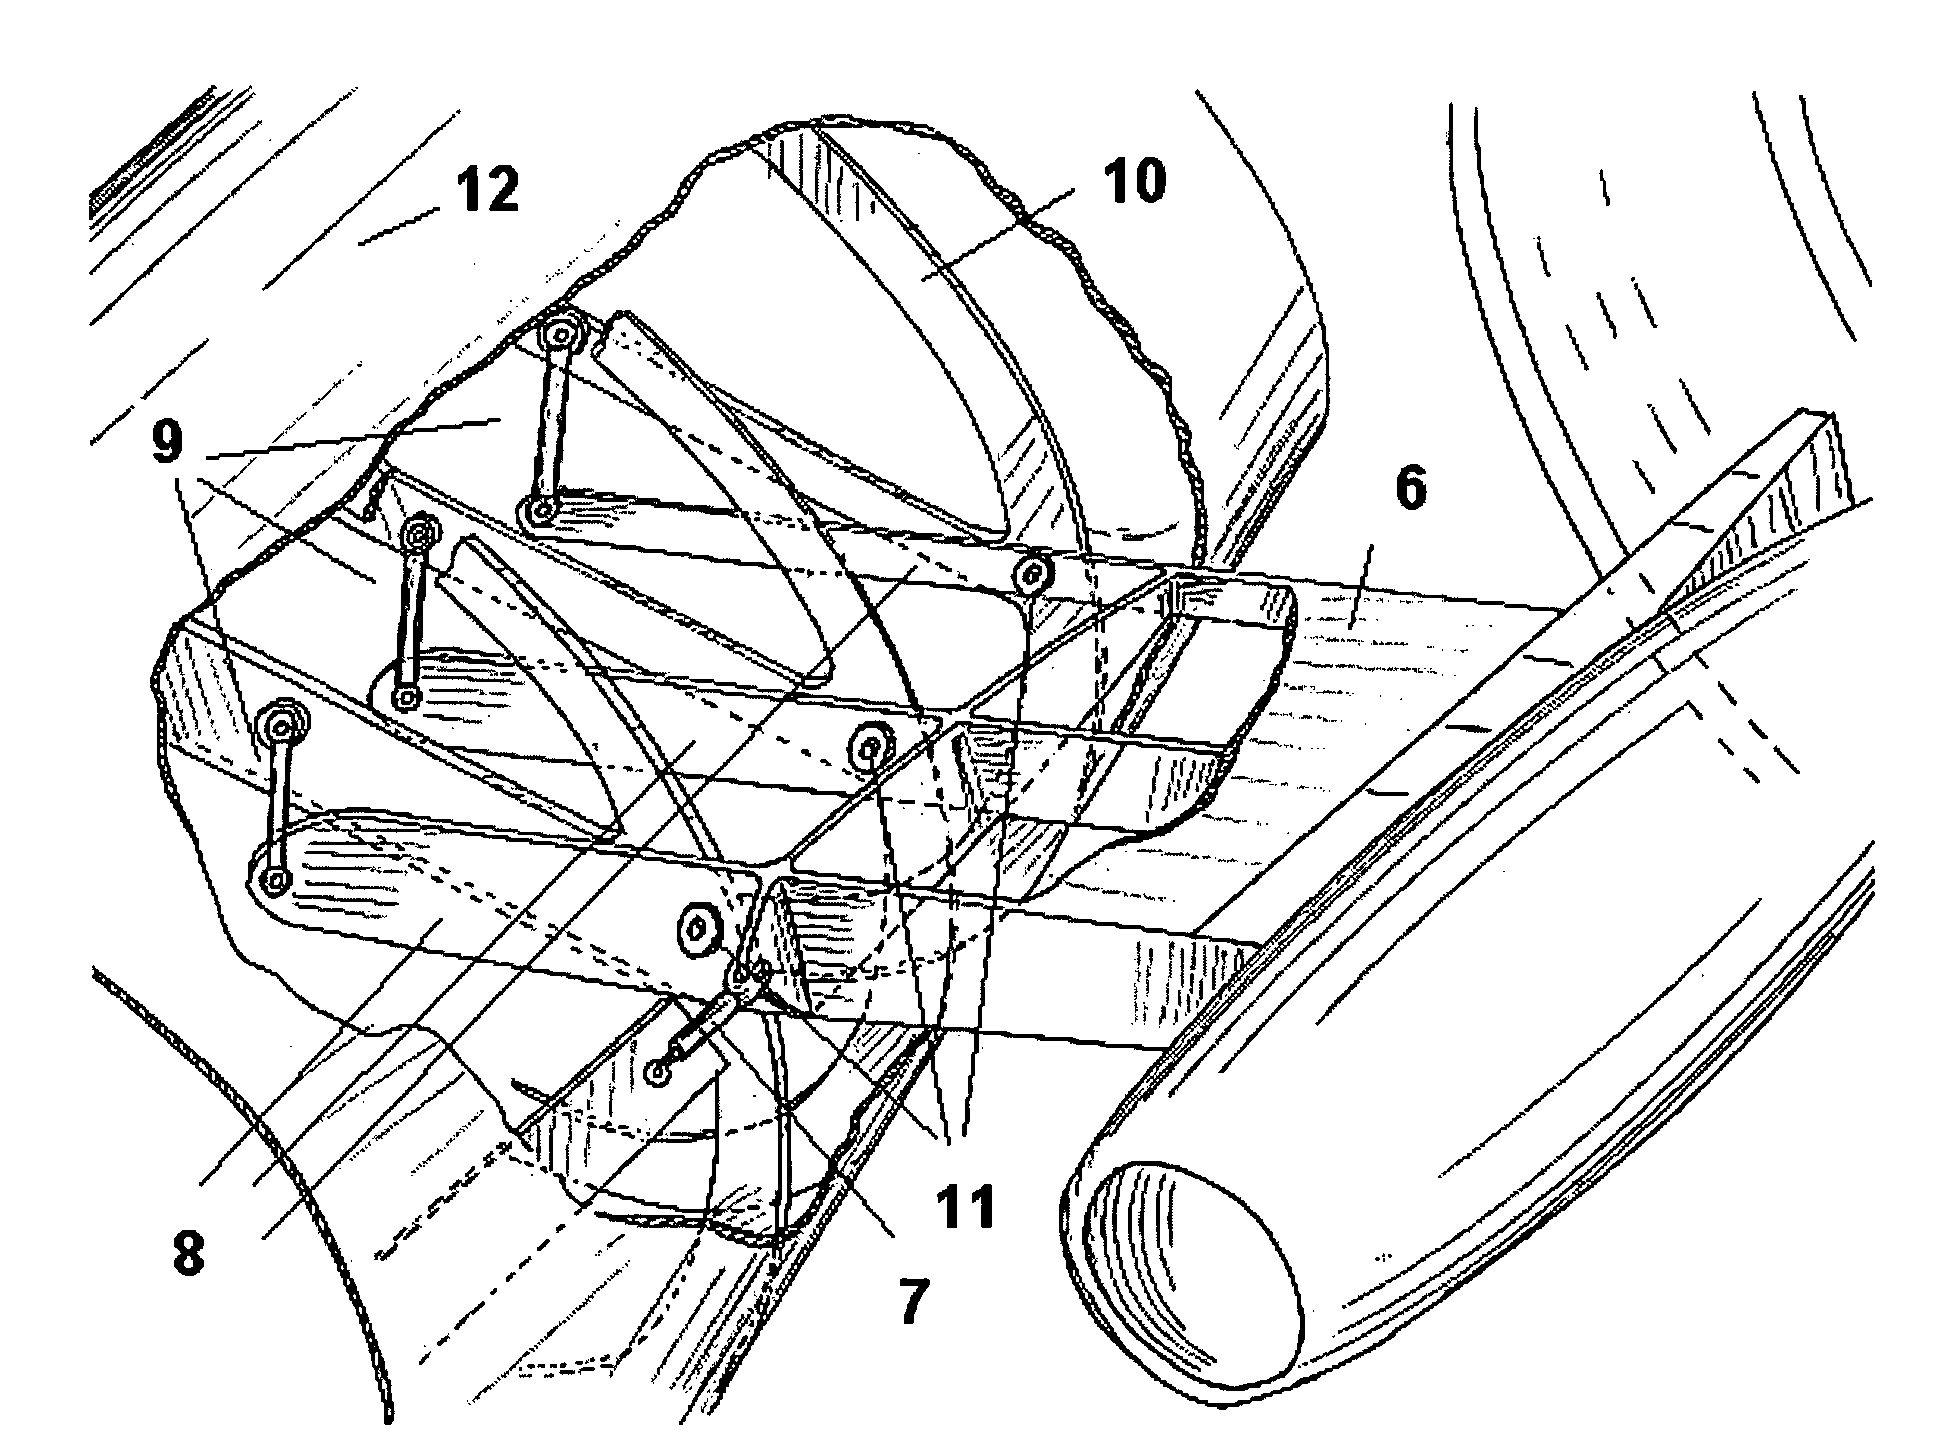 Arrangement for mounting an engine on the airframe of an aircraft